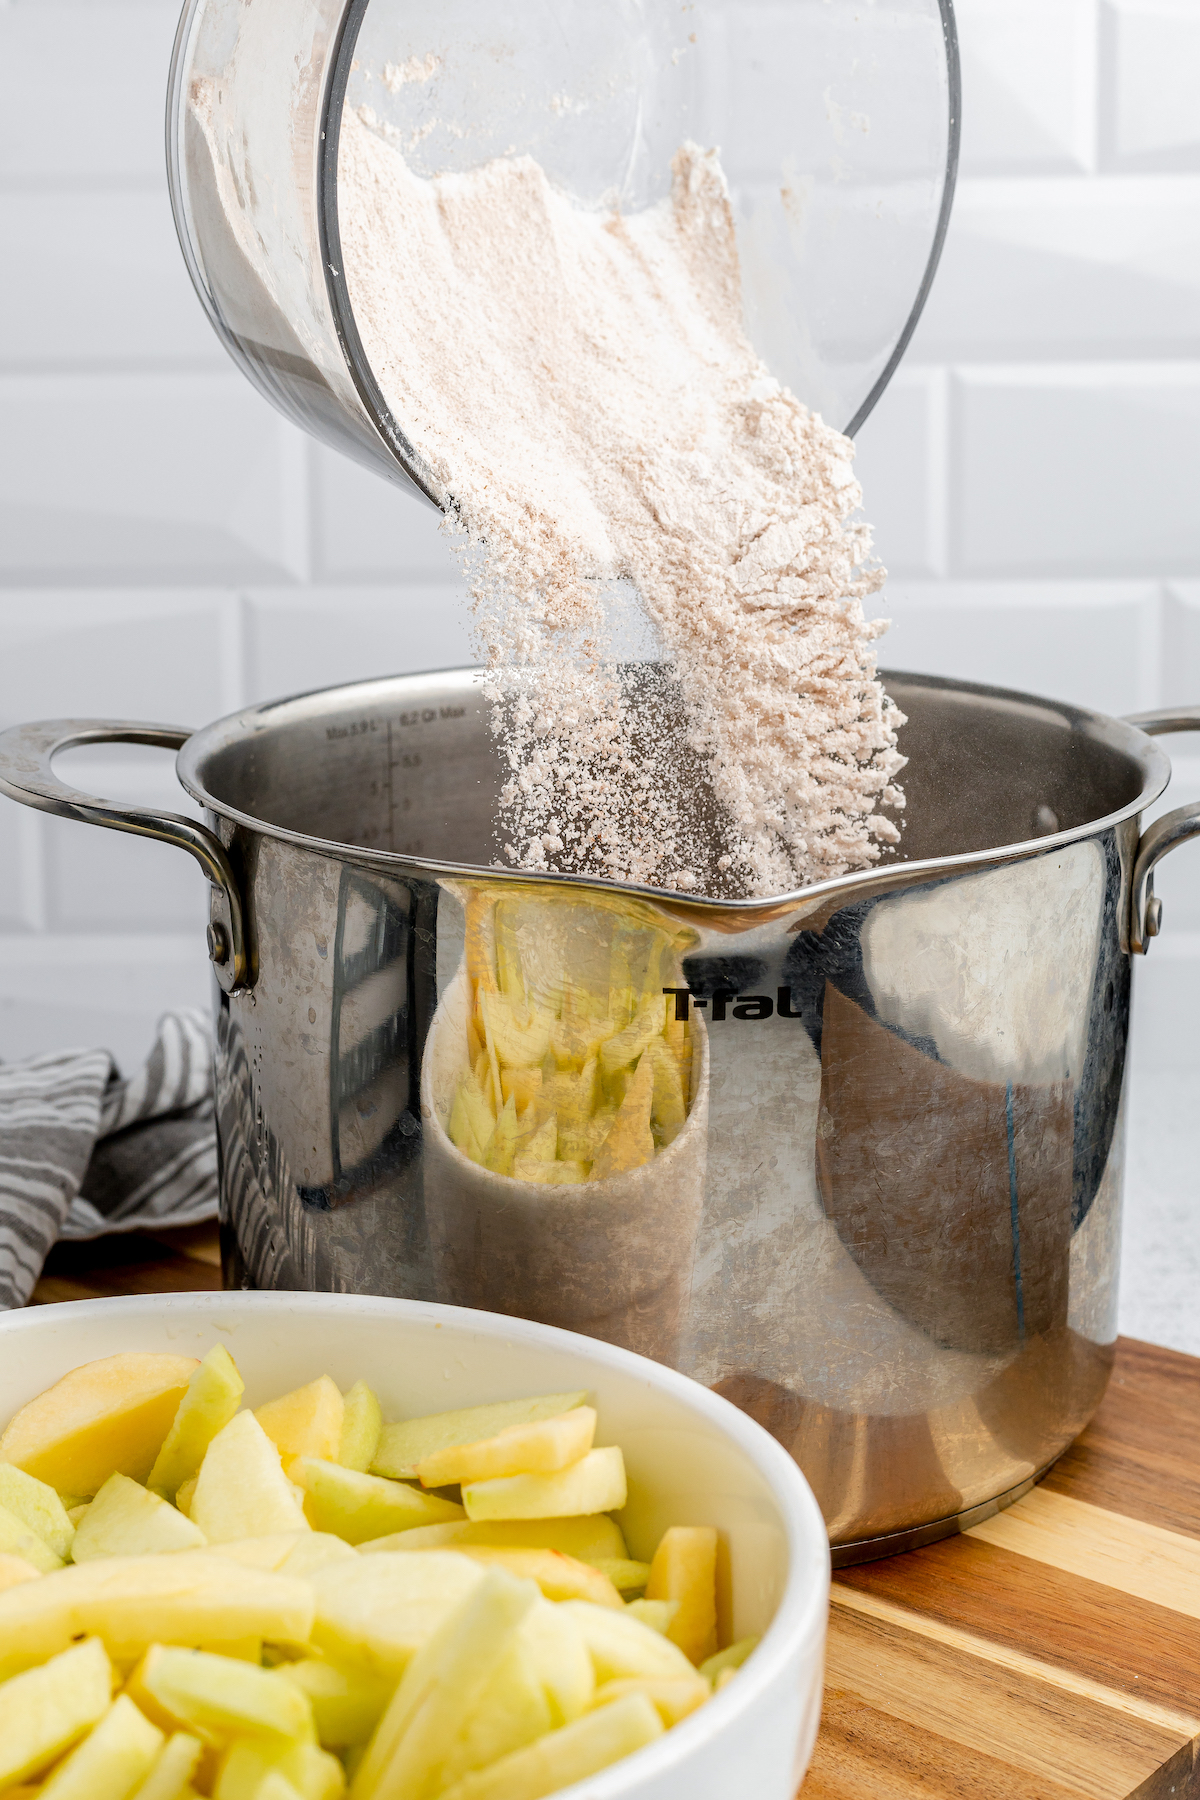 The cornstarch mixture is poured into a large metal pot.